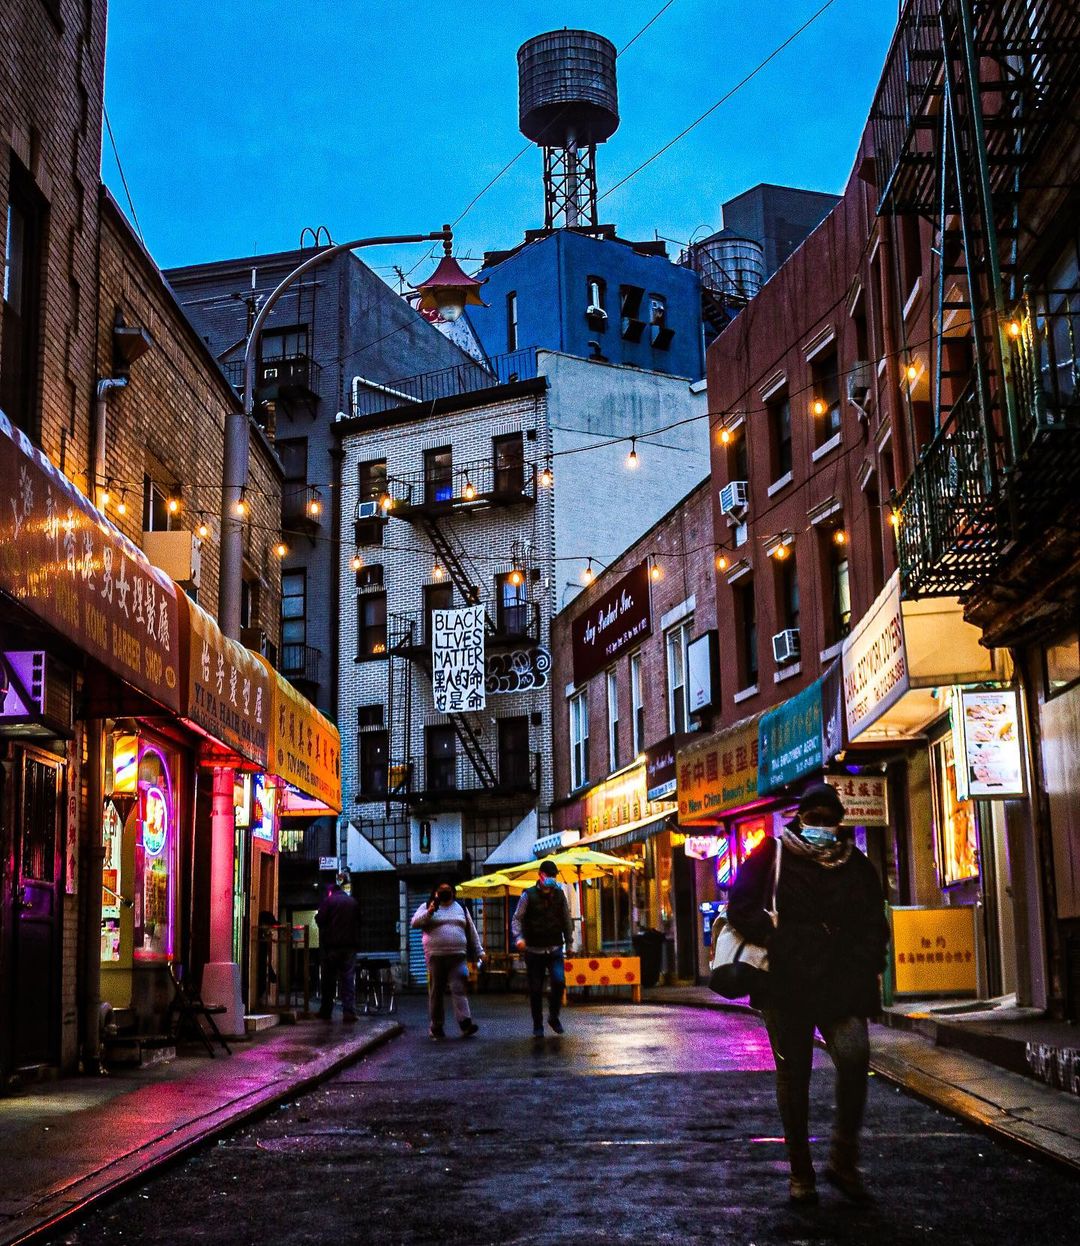 People Walking Through Side Streets in Chinatown in NYC. Photo by Instagram user @katiegodowski_photography